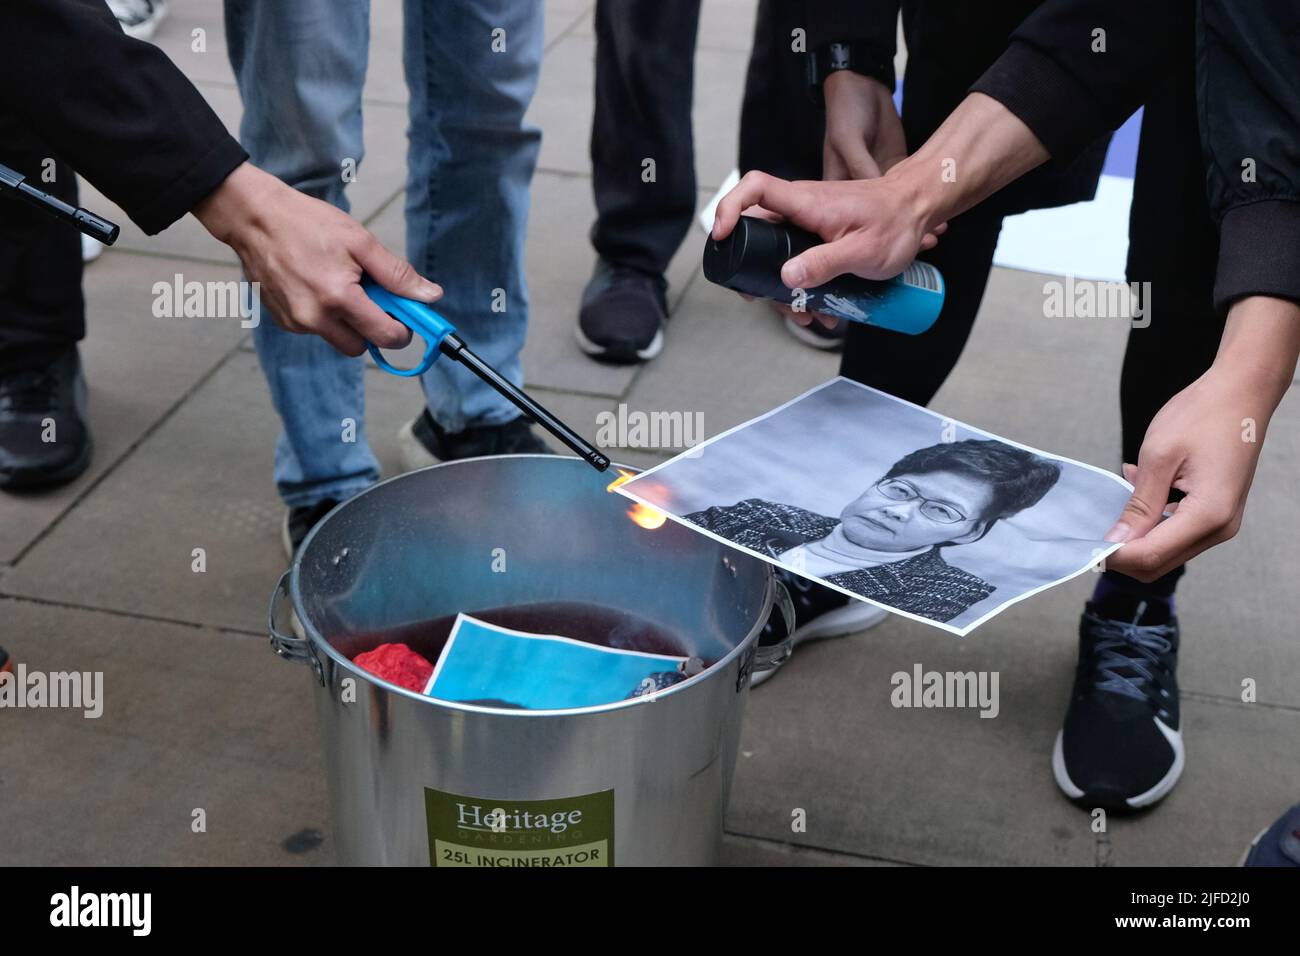 London, UK, 1st July, 2022. Hong Kong pro-democracy activists burnt portraits of Carrie Lam during a rally outside the Hong Kong Trade & Economic Office on the 25th anniversary of the handover back to China, when it was agreed that territory would retain civil liberties under the principle of 'one country, two systems', for 50 years after 1997. Growing concern over the crackdown on protest and the introduction of the national security law have led to some Western nations' criticism of interference by Beijing authorities. Credit: Eleventh Hour Photography/Alamy Live News Stock Photo